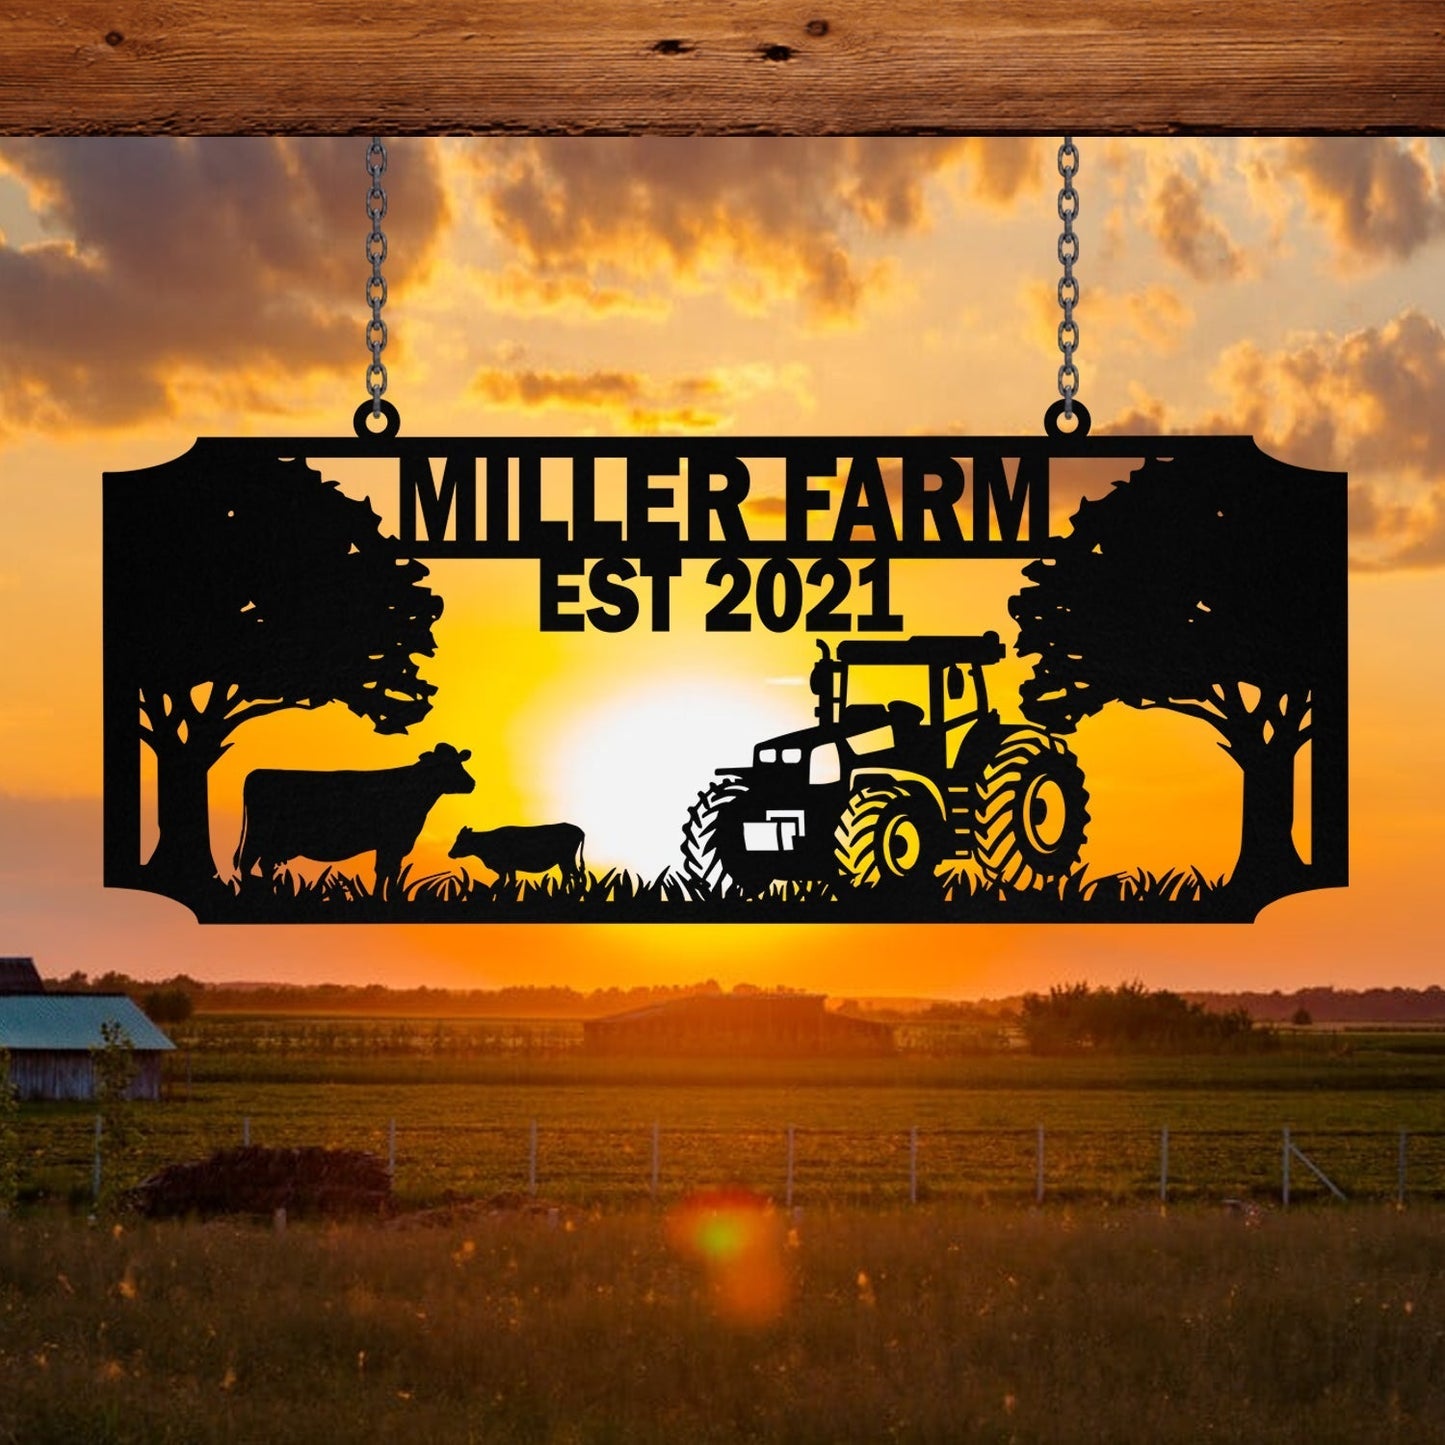 Personalized Metal Farm Sign Cow Tractor Monogram Custom Outdoor Farmhouse Front Gate Entry Road Wall Decor Art Gift